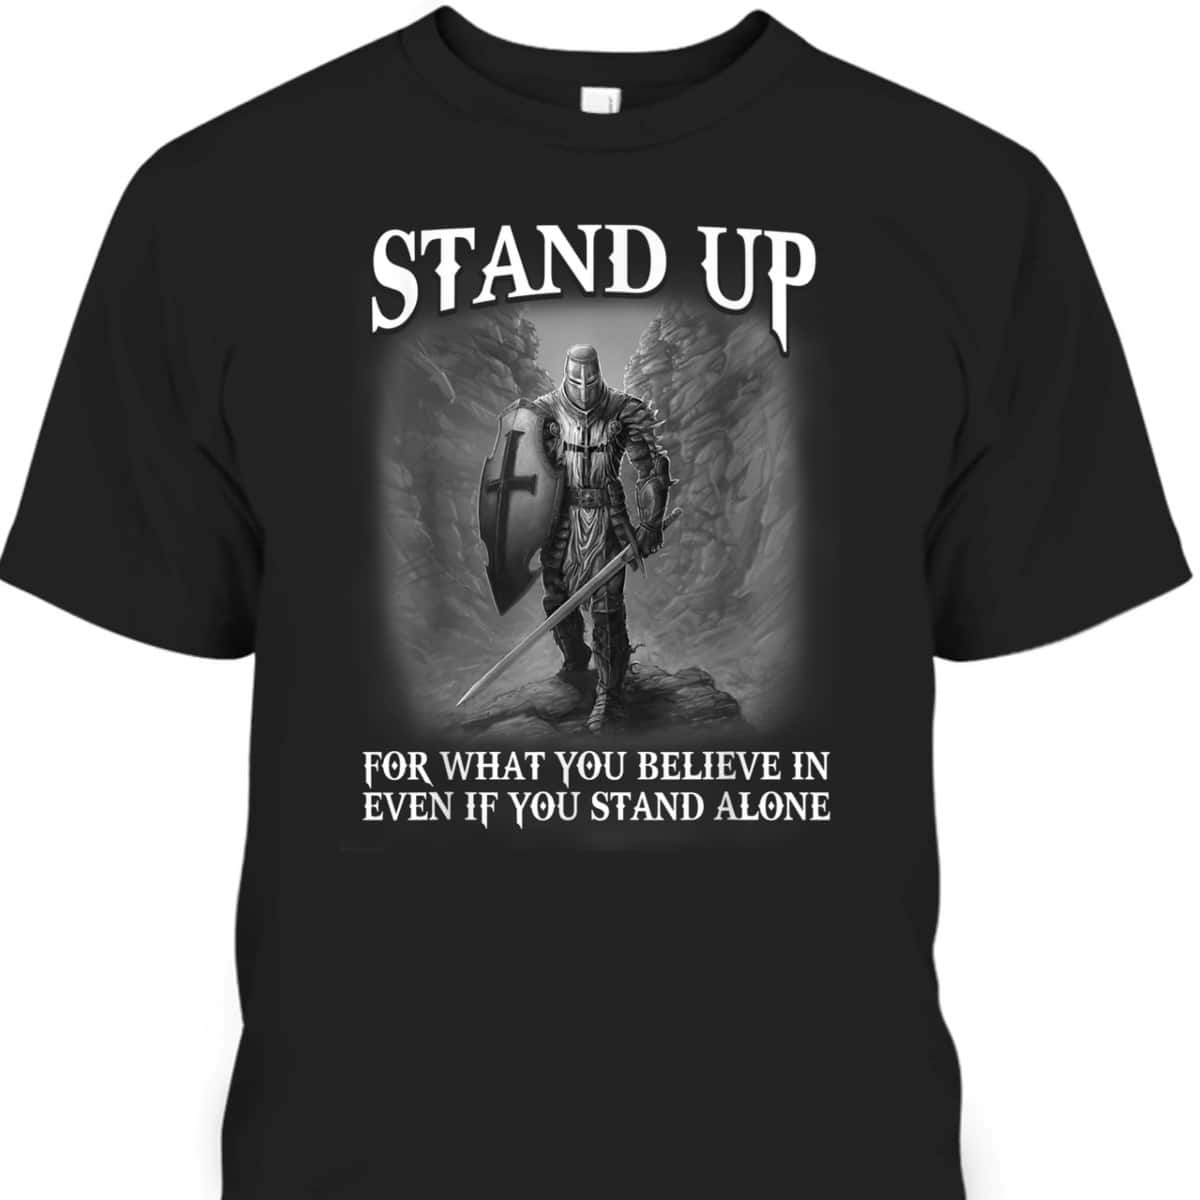 Armor Of God T-Shirt Knight Templar Christian Warrior Standing Up For Believe In